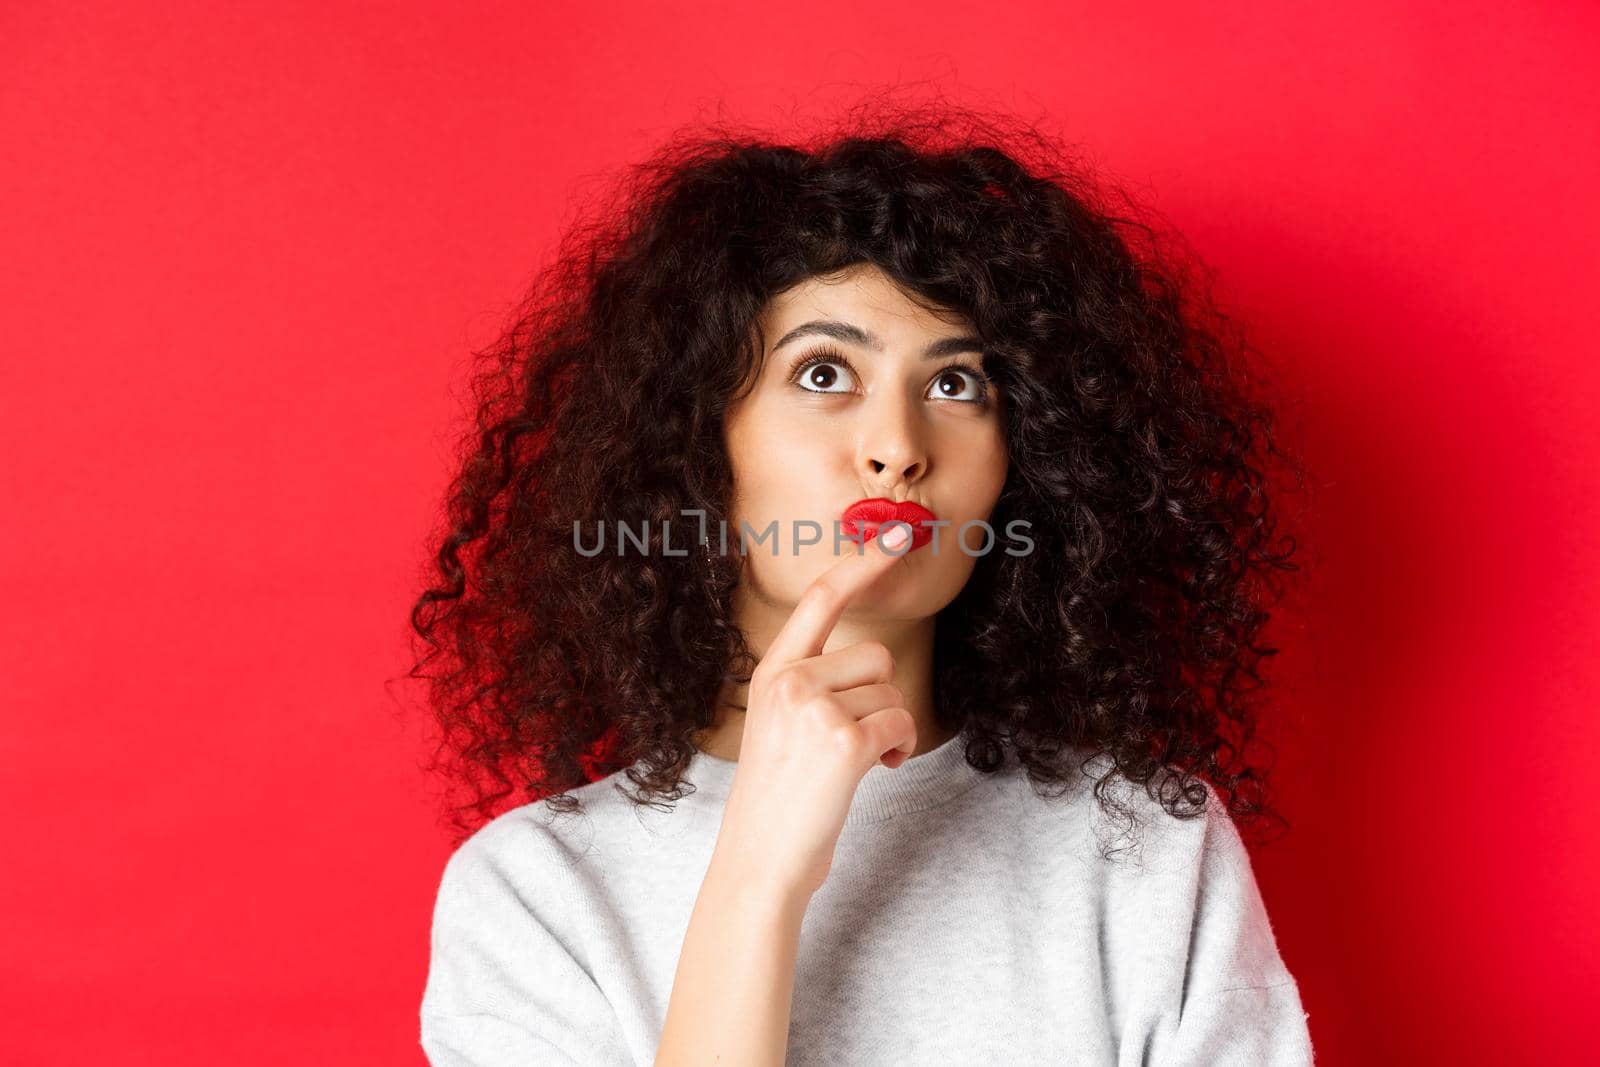 Close-up portrait of pensive young woman making choice, looking up thoughtful and serious, standing on red background.